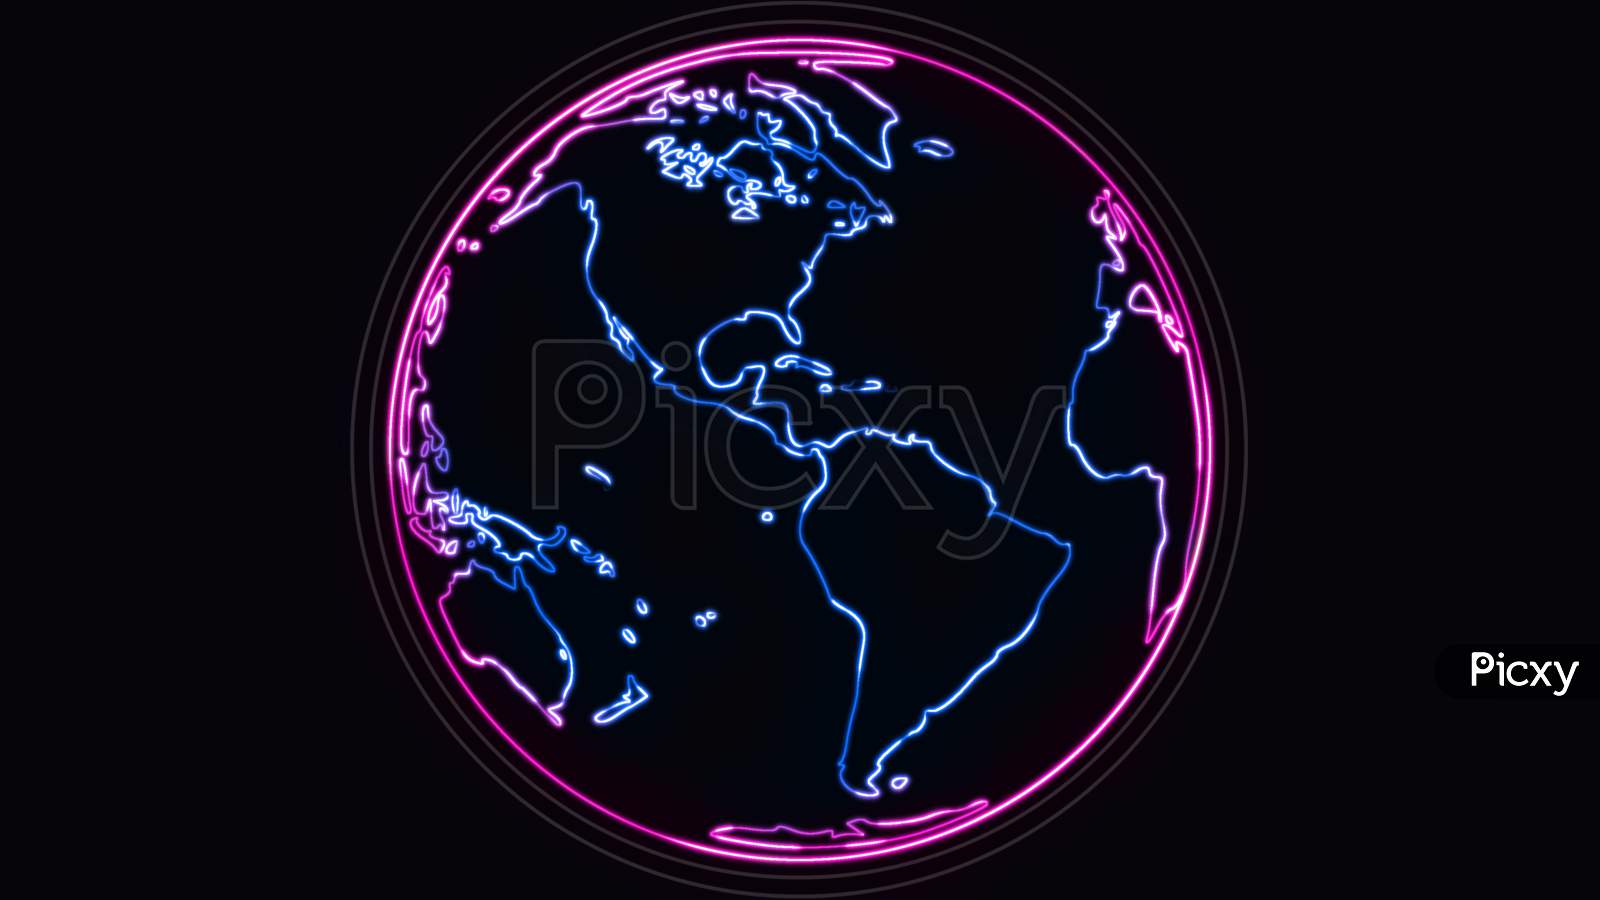 Vector Graphic Of Glowing Neon Sign Of World Earth In Globe Symbol And Greeting Text At The Center, On Dark Black Background. Earth Neon Banner.